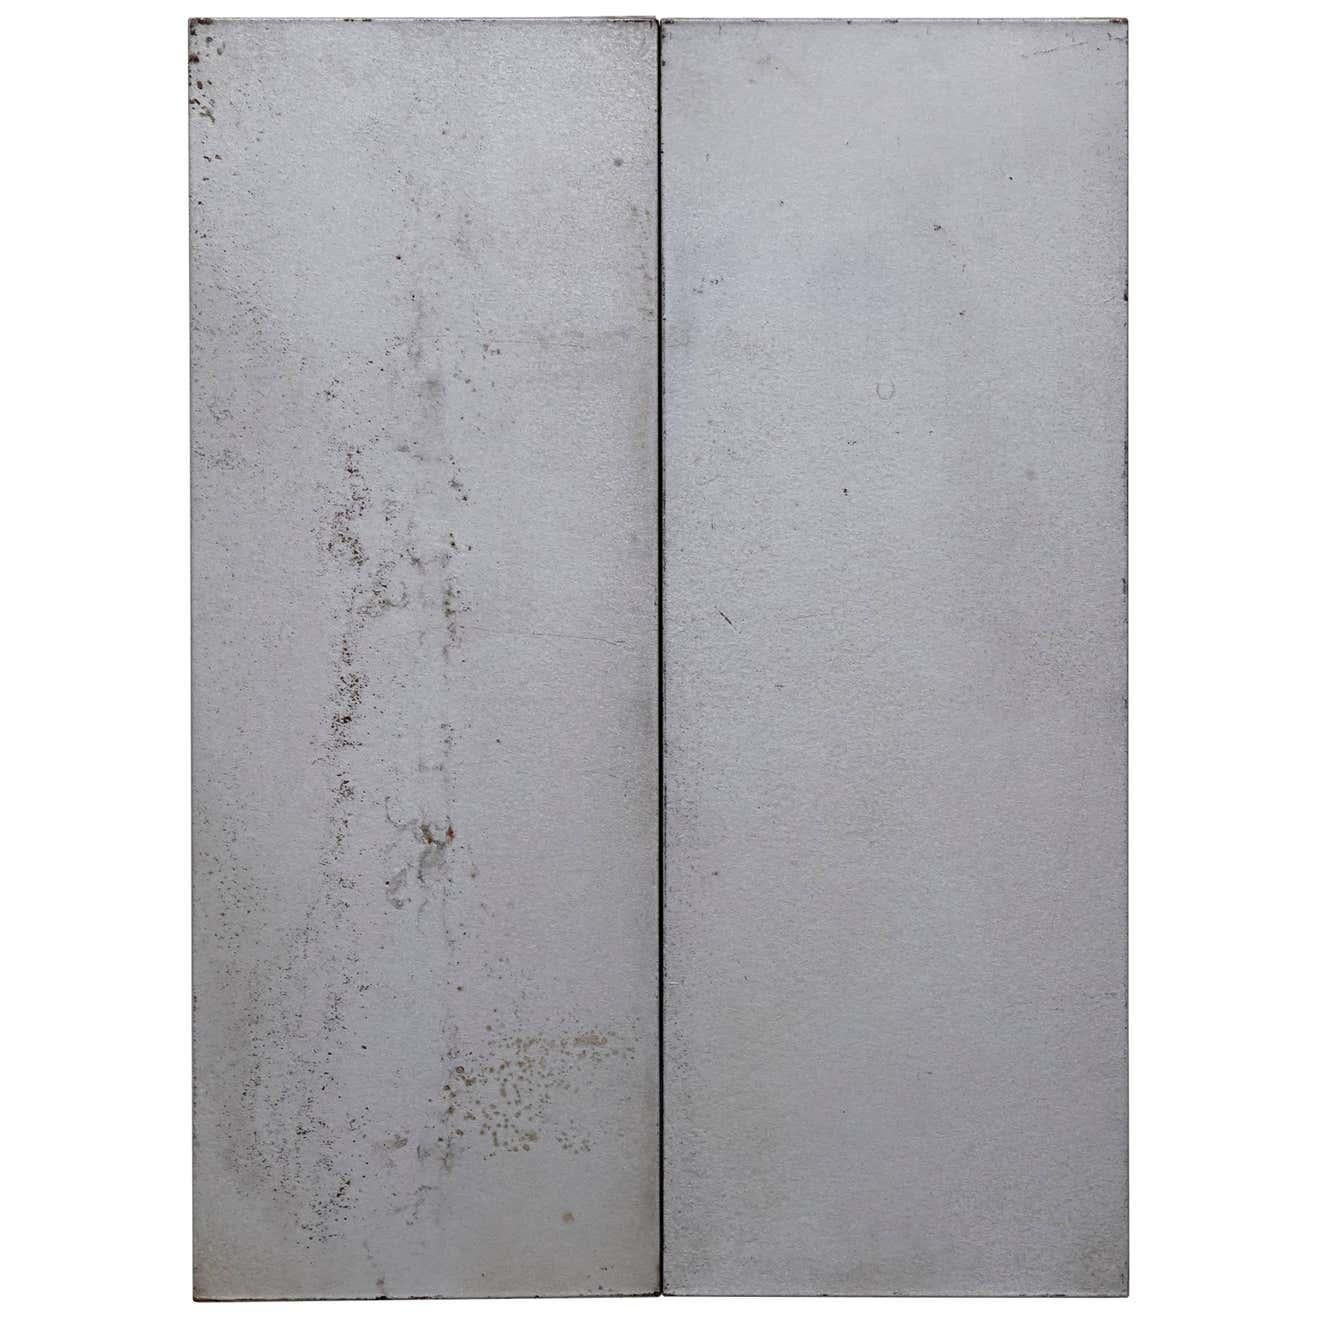 Ramon Horts Contemporary Metal Abstract Minimalist Artwork 1/2 N 003 For Sale 2